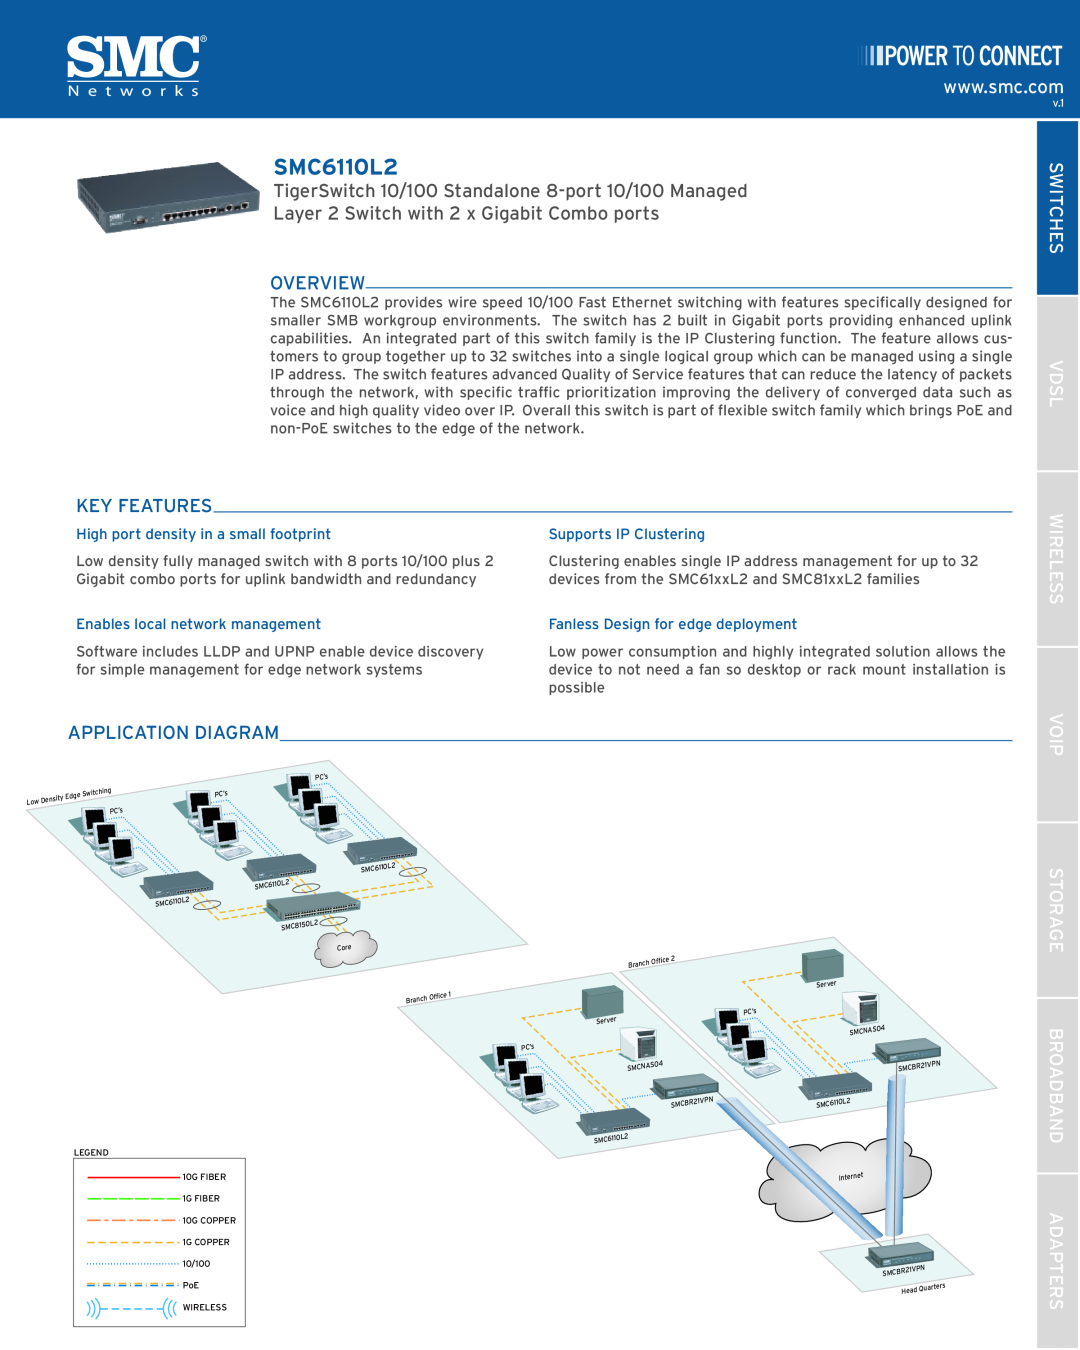 SMC Networks SMC6110L2 manual Overview, Switches Vdsl, Key Features, Wireless, Application Diagram, Voip 